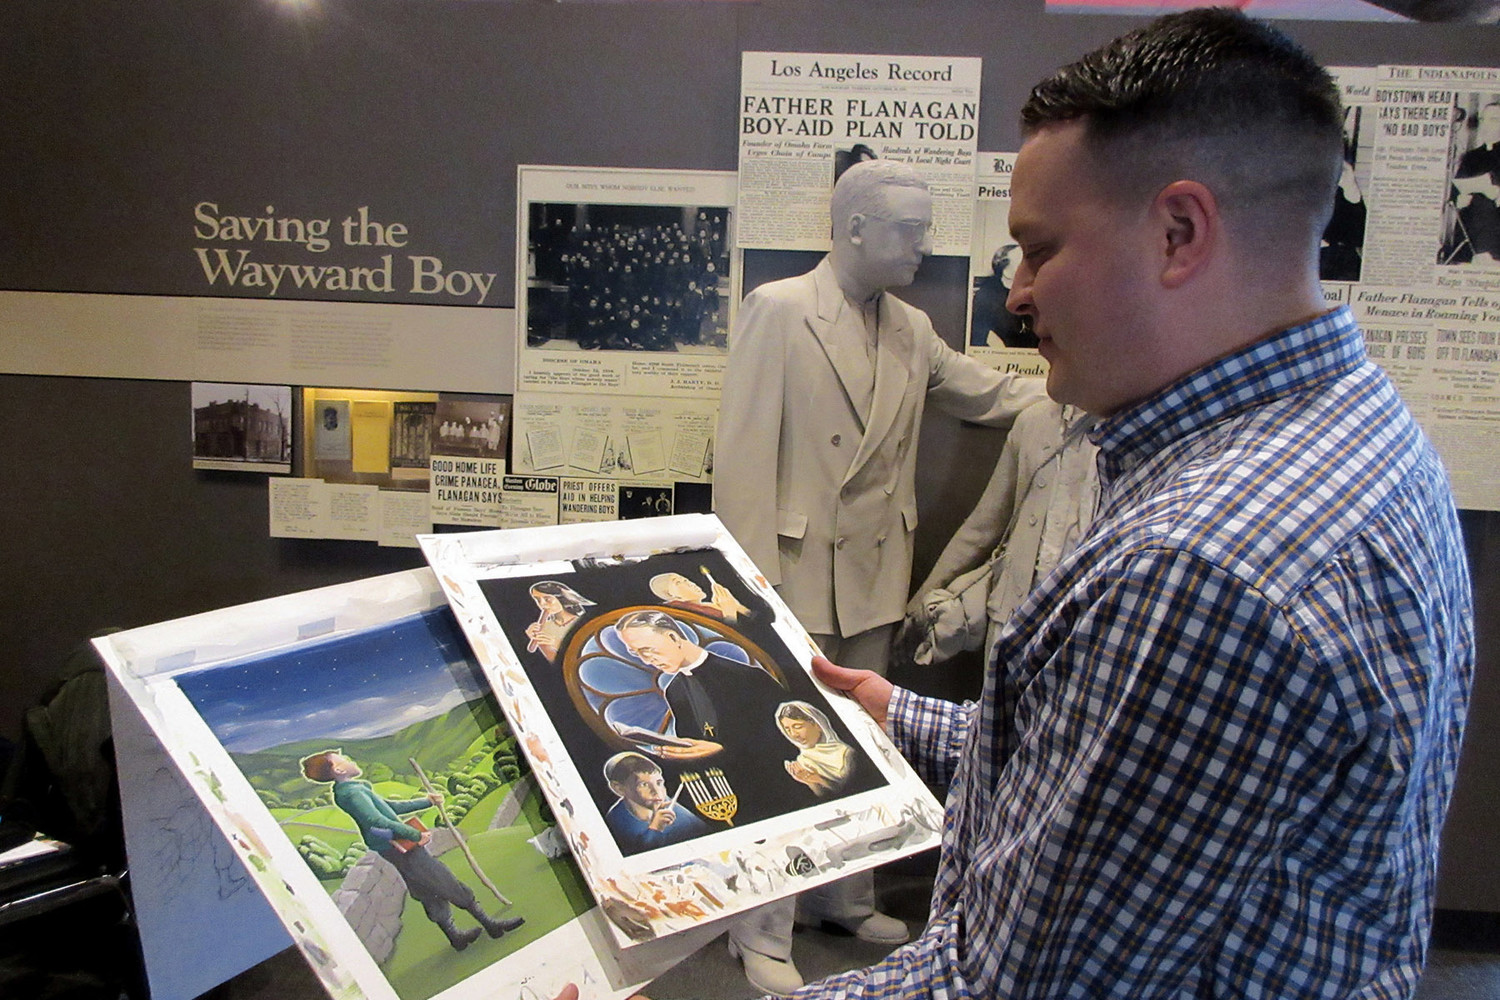 Eli Hernandez looks over examples of his artwork for his children’s book “Dearest Children: A Message Inspired by Father Edward J. Flanagan” March 17 at Boys Town’s Hall of History museum in Omaha, Neb.